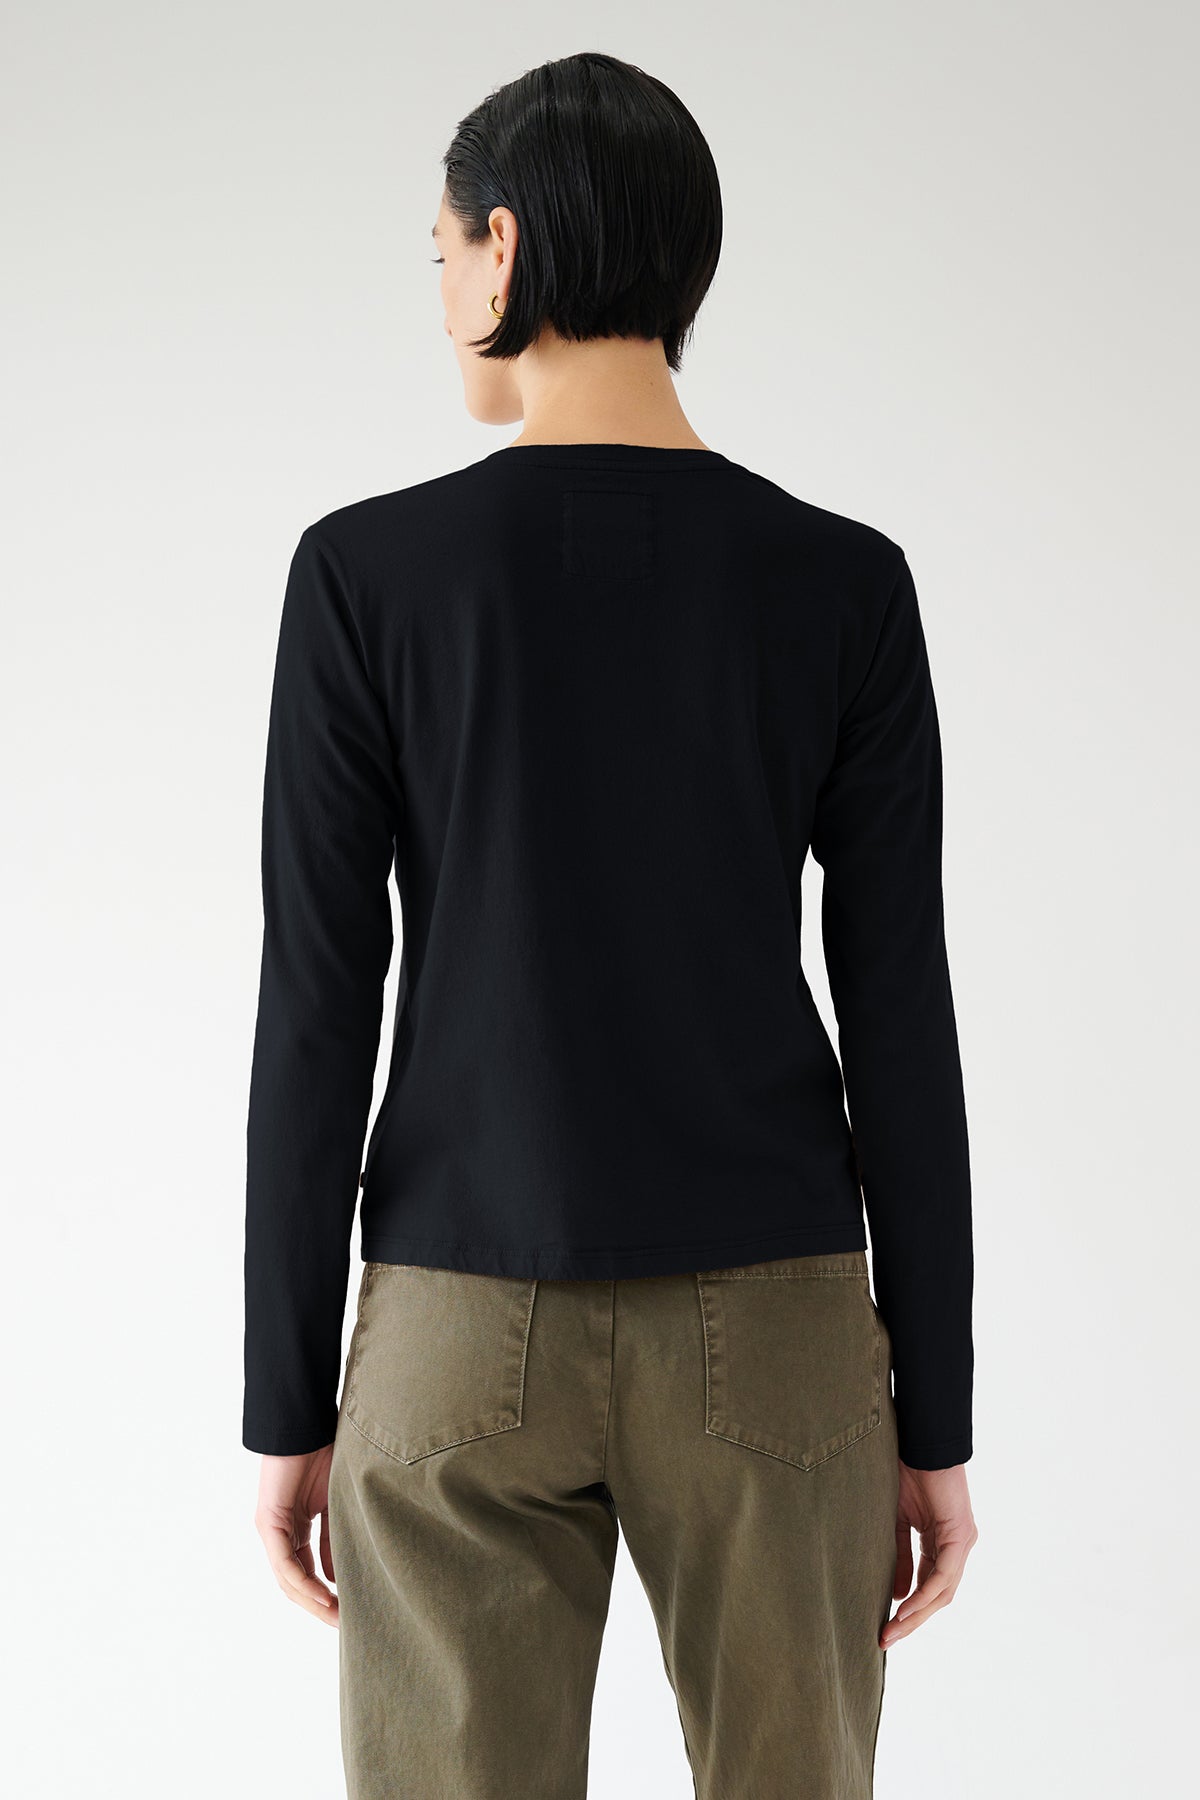 Woman wearing a Velvet by Jenny Graham VICENTE TEE in black and olive pants seen from the back.-36503784161473